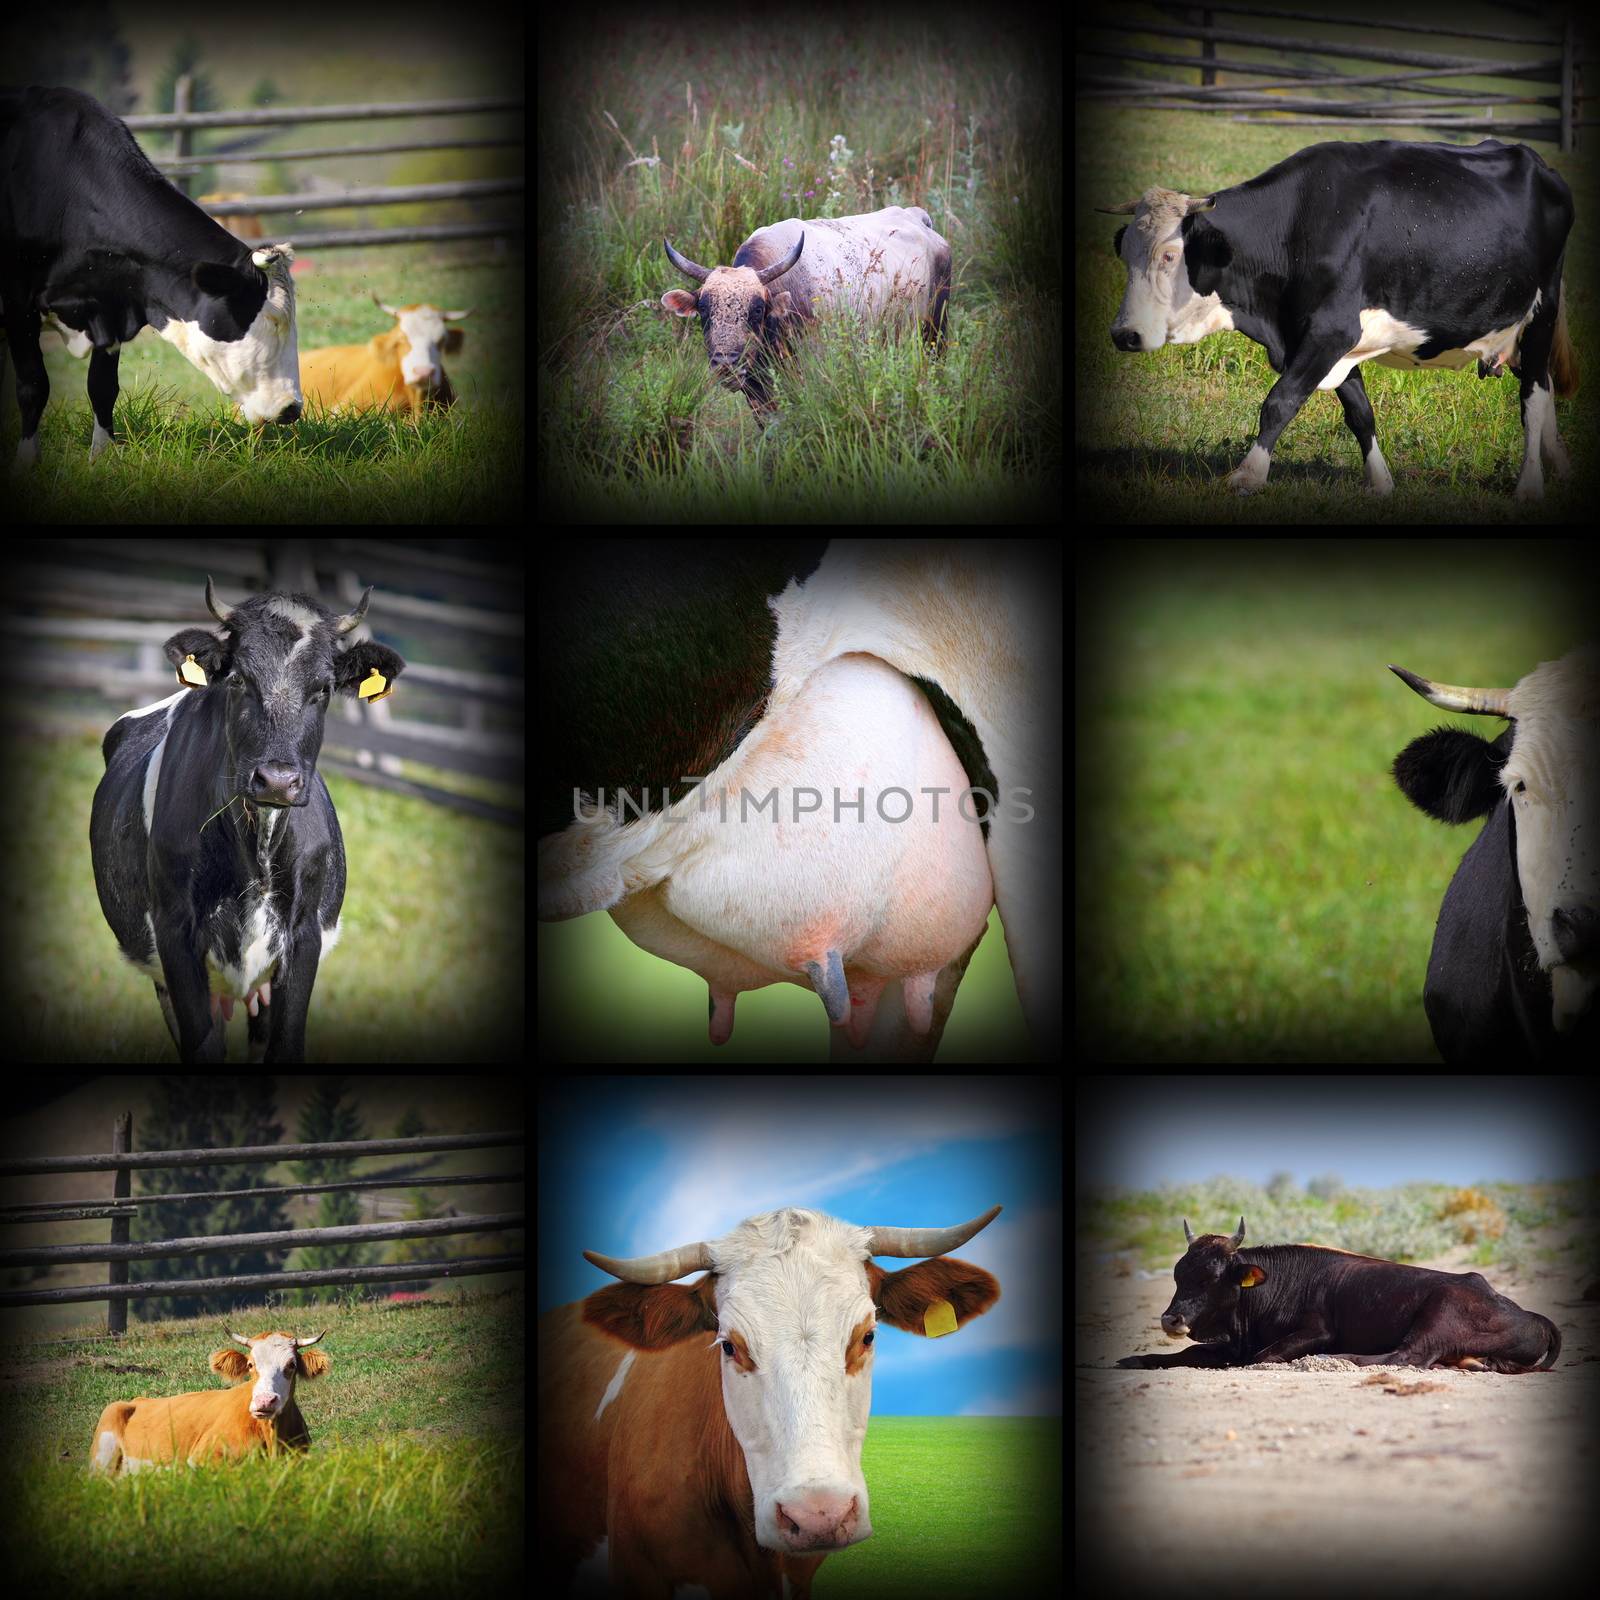 cows images in one collage by taviphoto